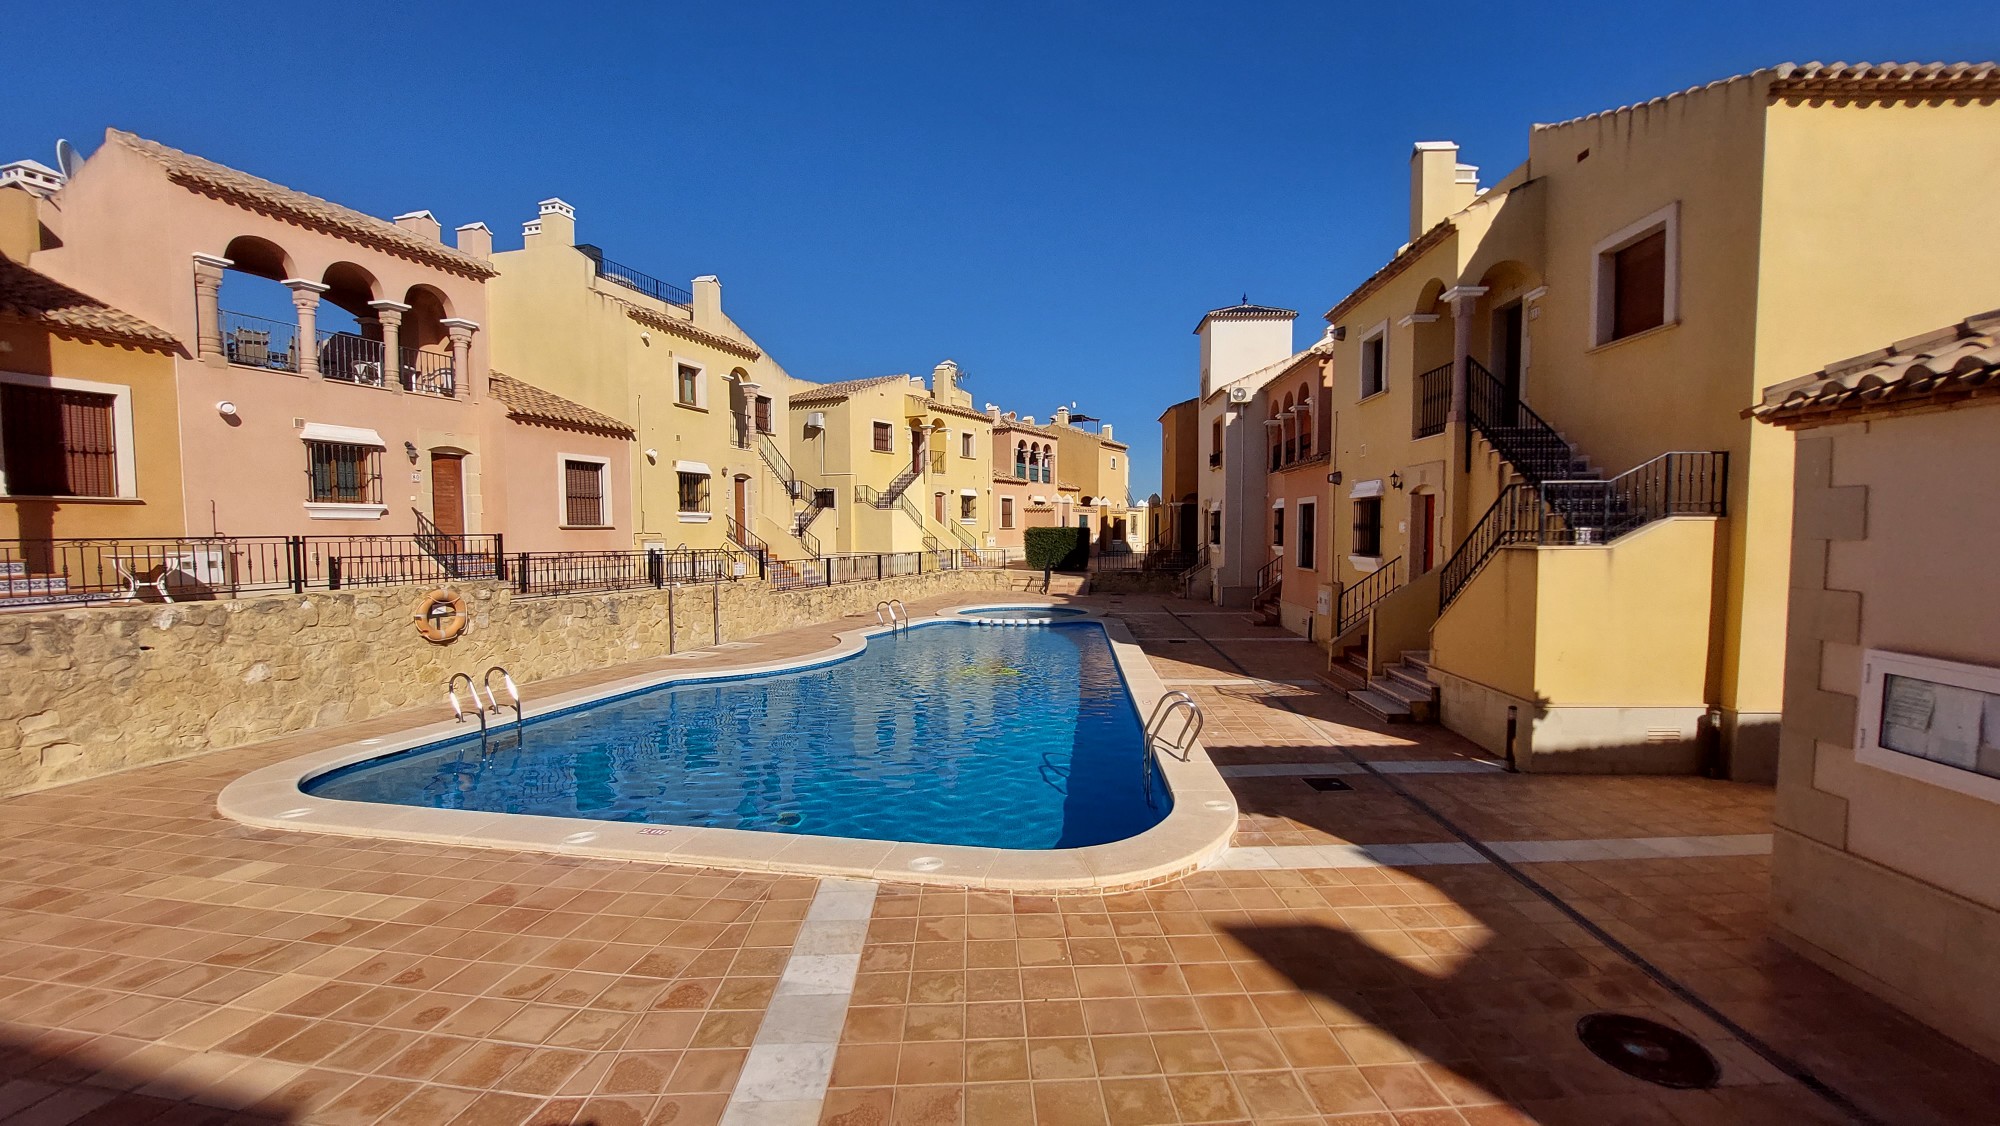 For sale: 2 bedroom apartment / flat in Algorfa